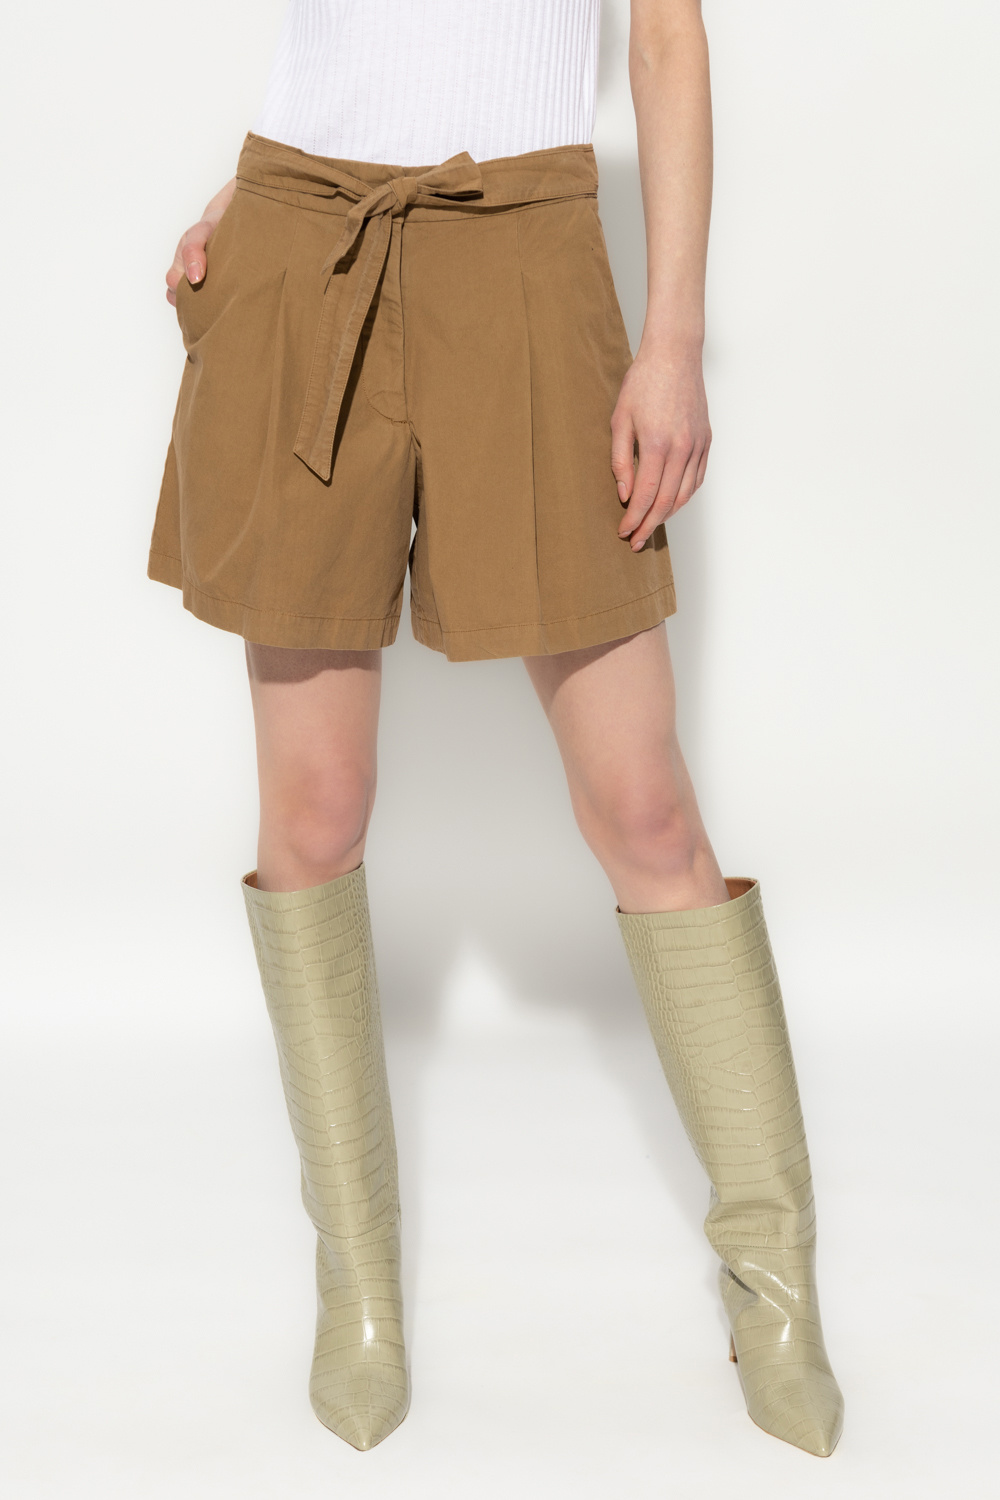 A.P.C. Cube shorts with pockets